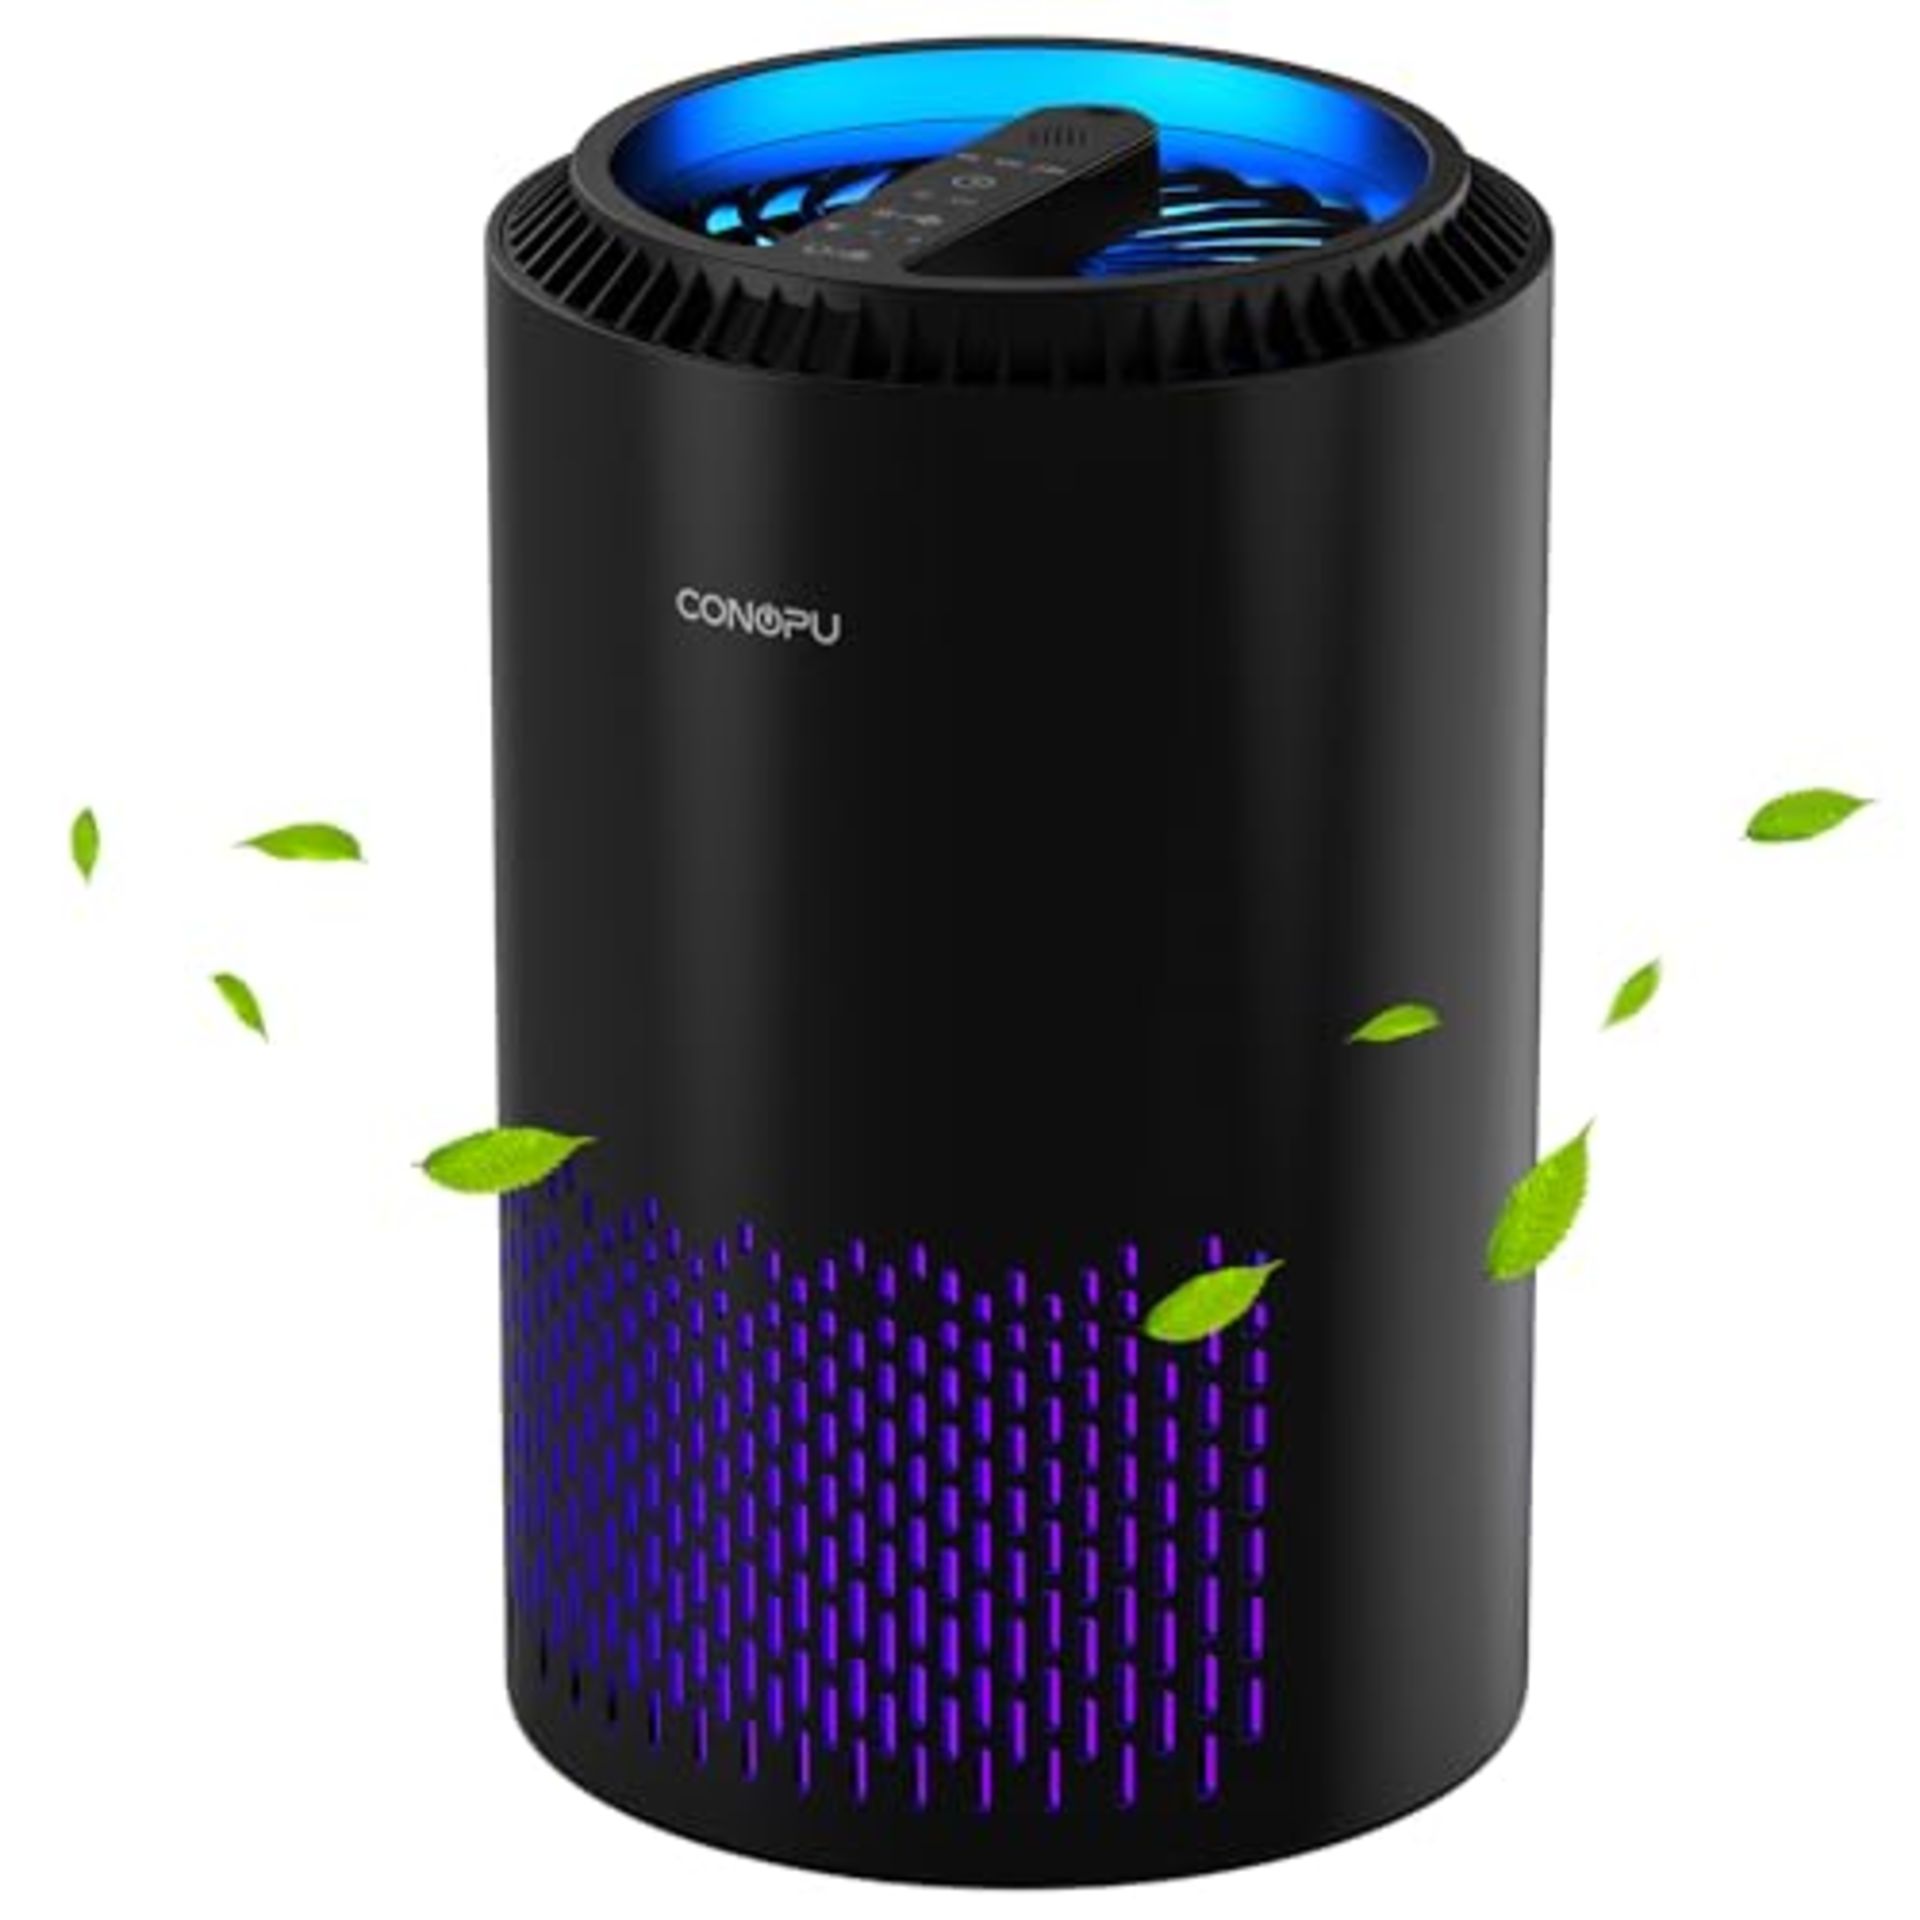 CONOPU Air Purifier for Home Bedroom with Hepa H13 99.97% Filter, Black, Air Cleaner p